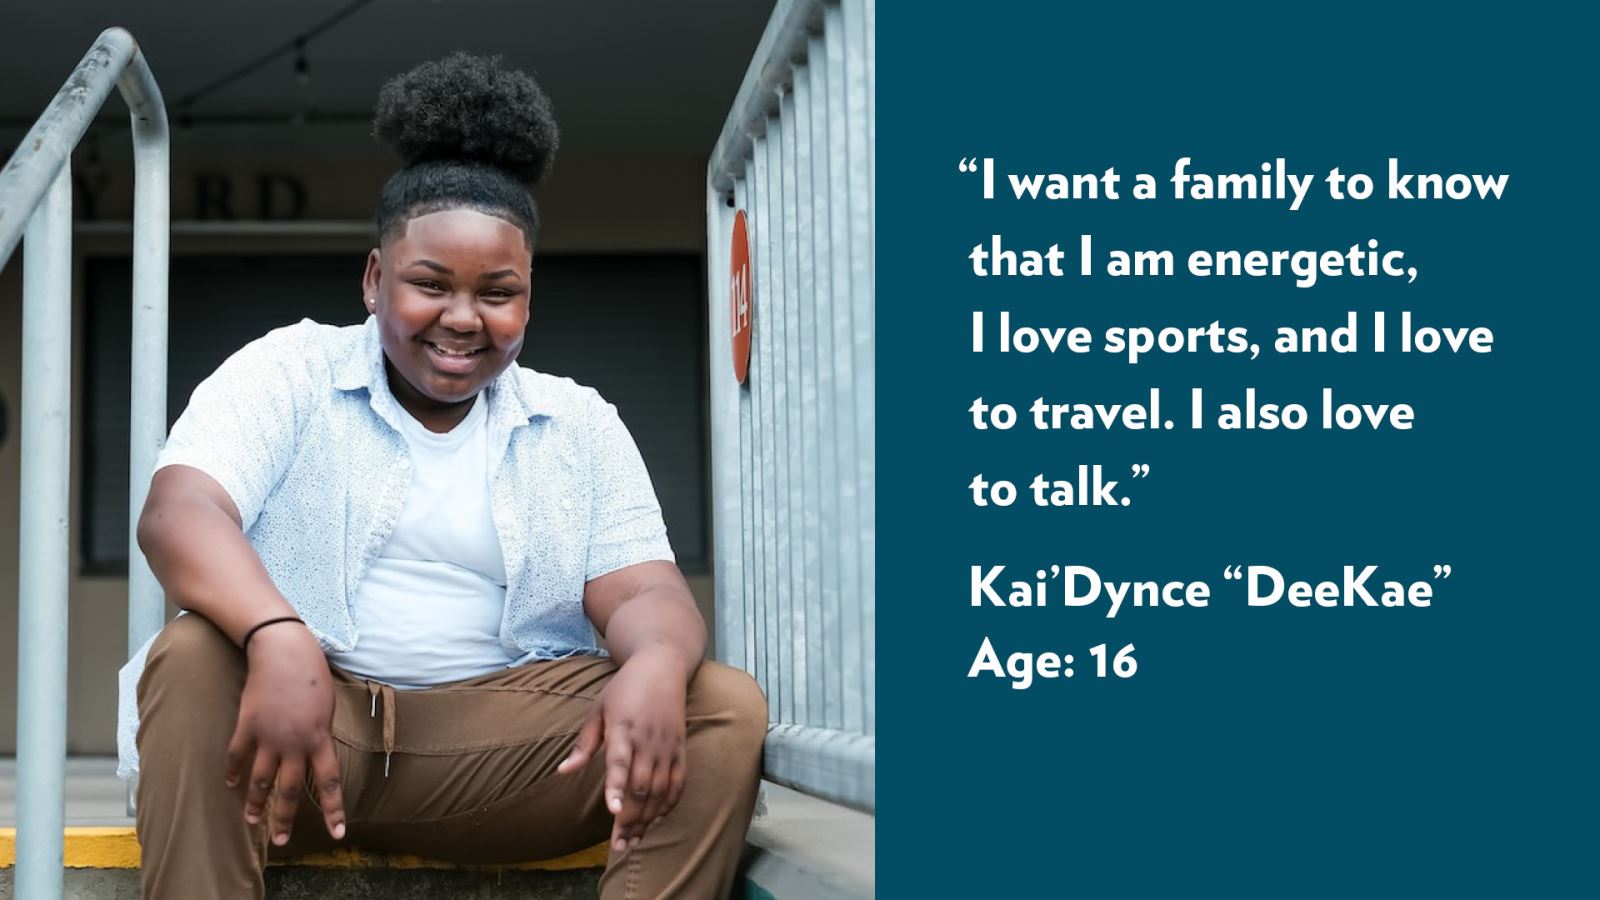 I want a family to know that I am energetic, I love sports, and I love to travel. I also love to talk. Kai’Dynce “DeeKae,” age 16. View profile.